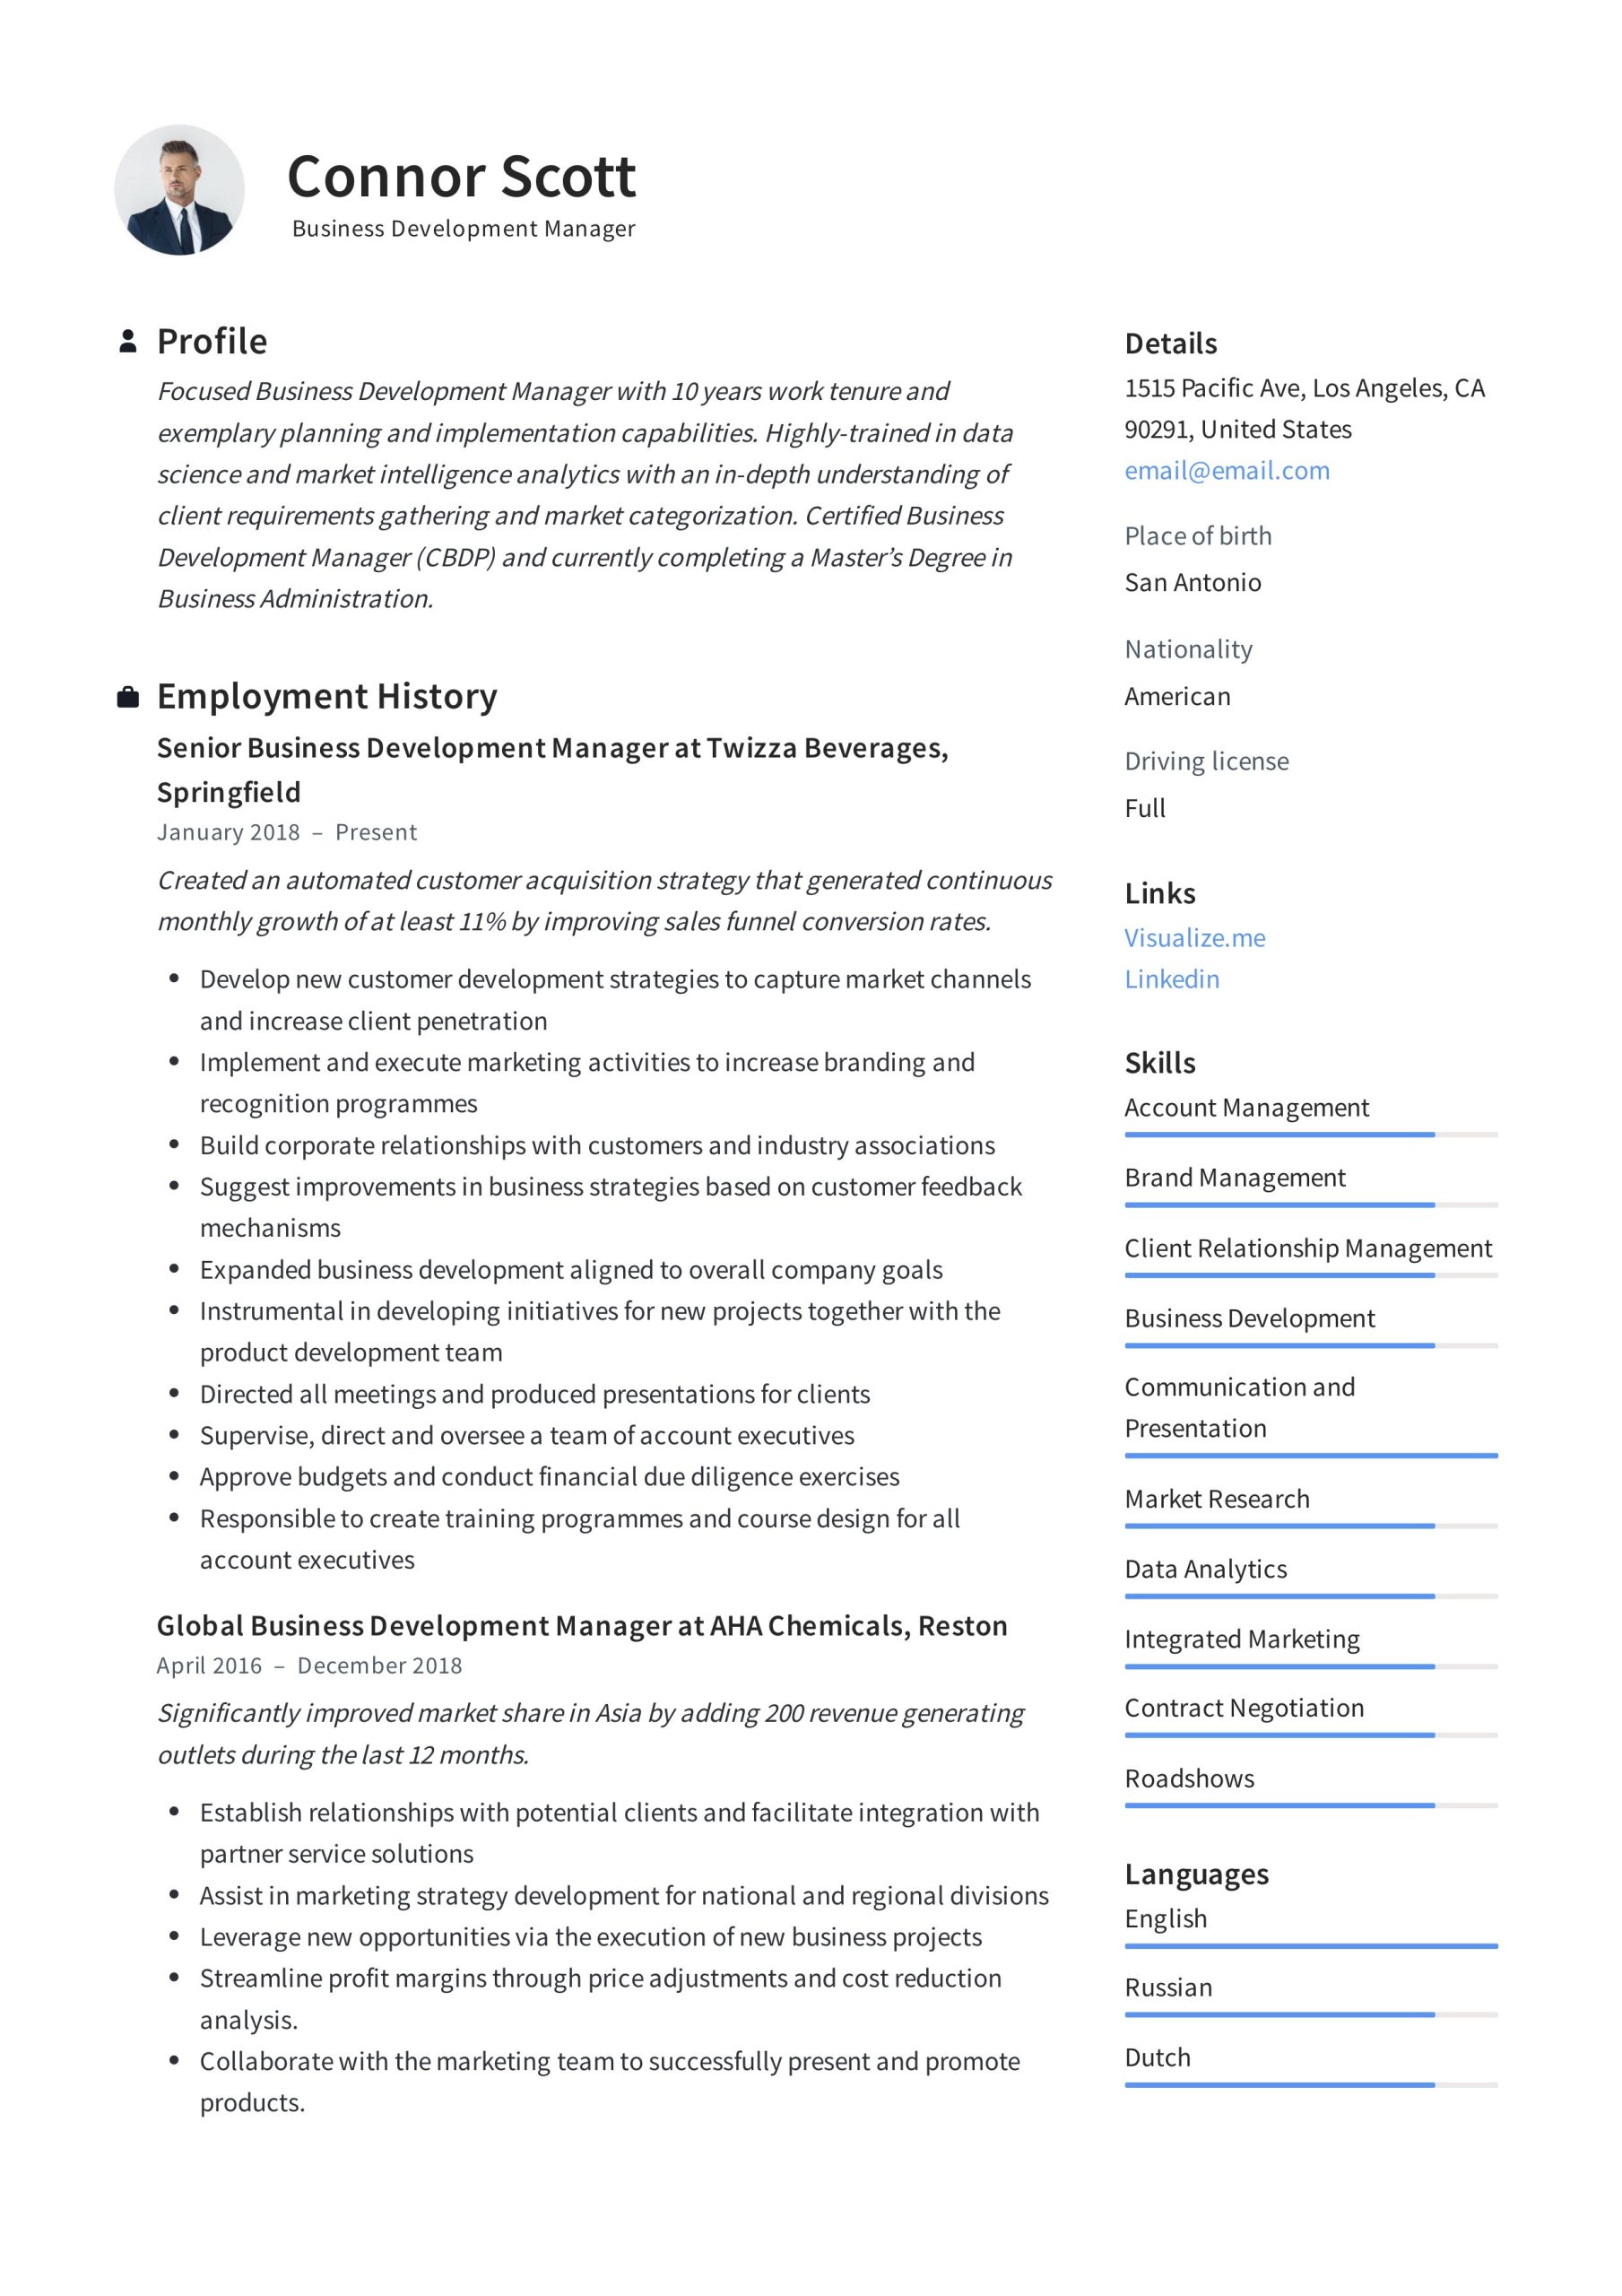 Learning and Development Director Resume Sample Business Development Manager Resume & Guide 2022